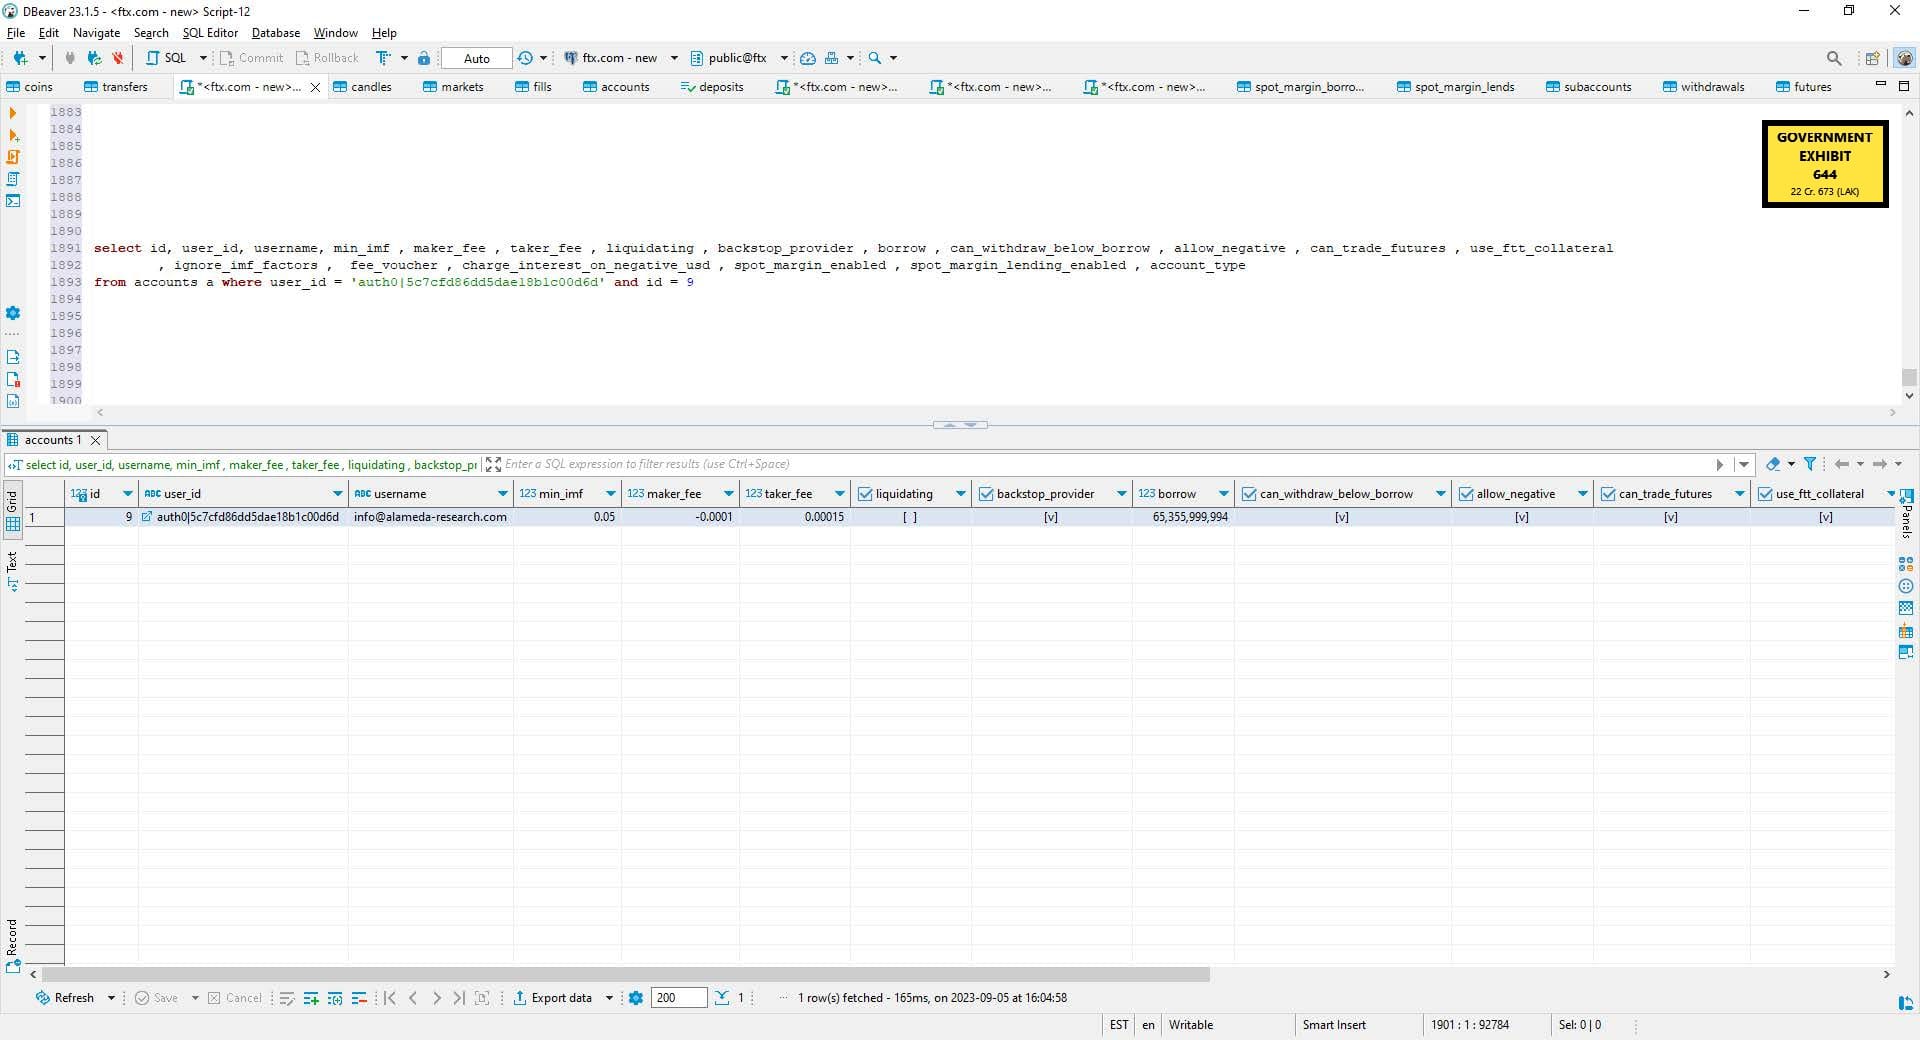 Screenshot of a database query returning one row, with username info@alameda-research.com, and borrow 65,355,999,944